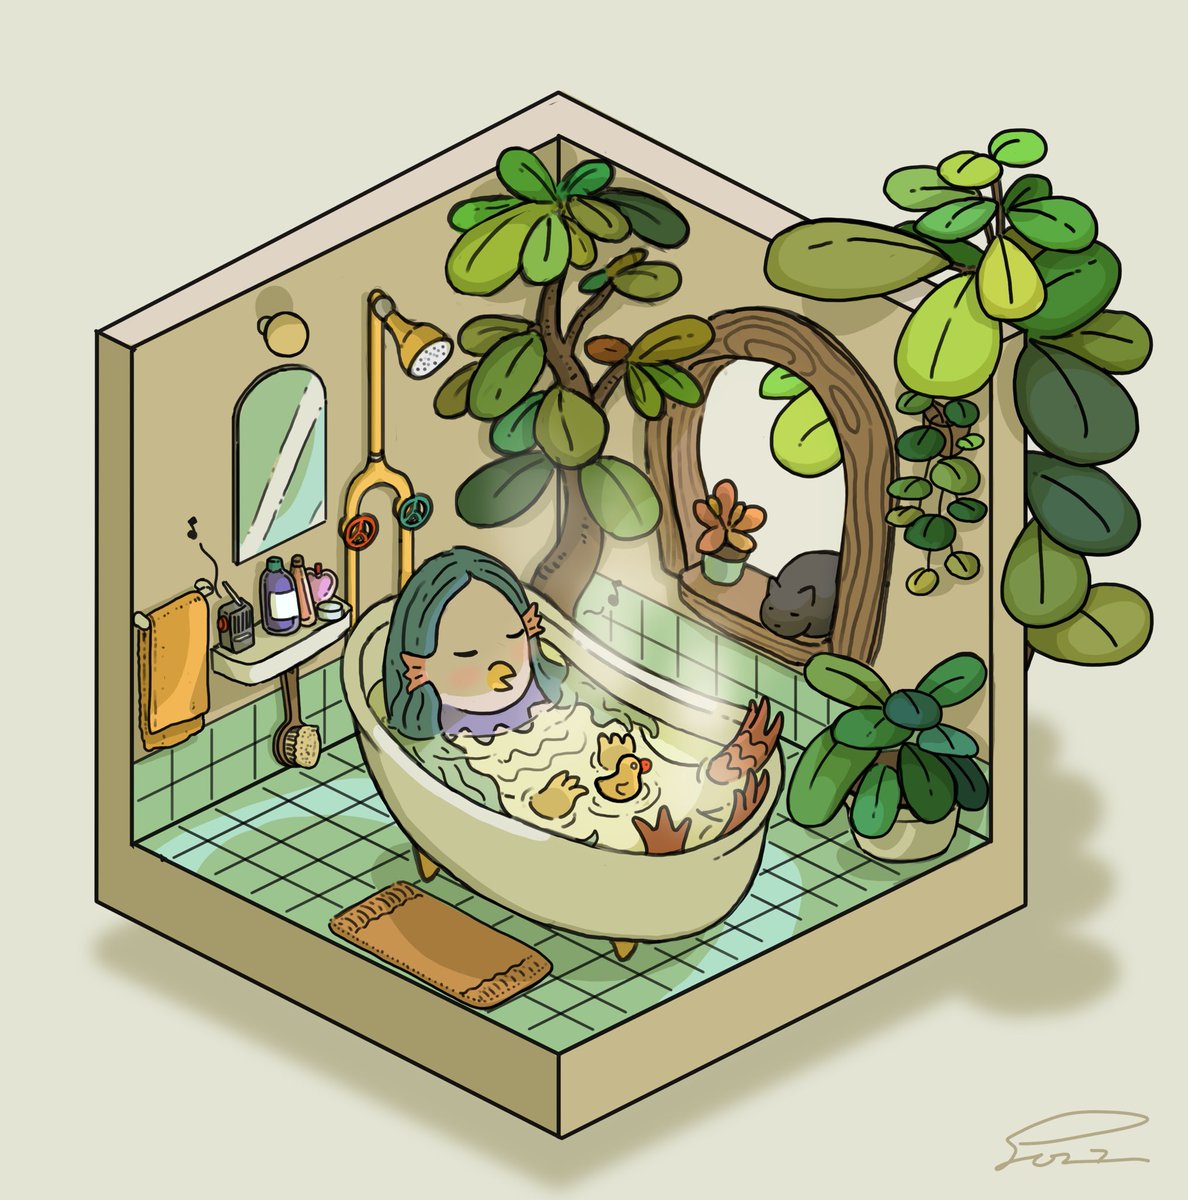 「AMABIE「Taking a bath slowly is also a se」|gozz/ごず🏝のイラスト